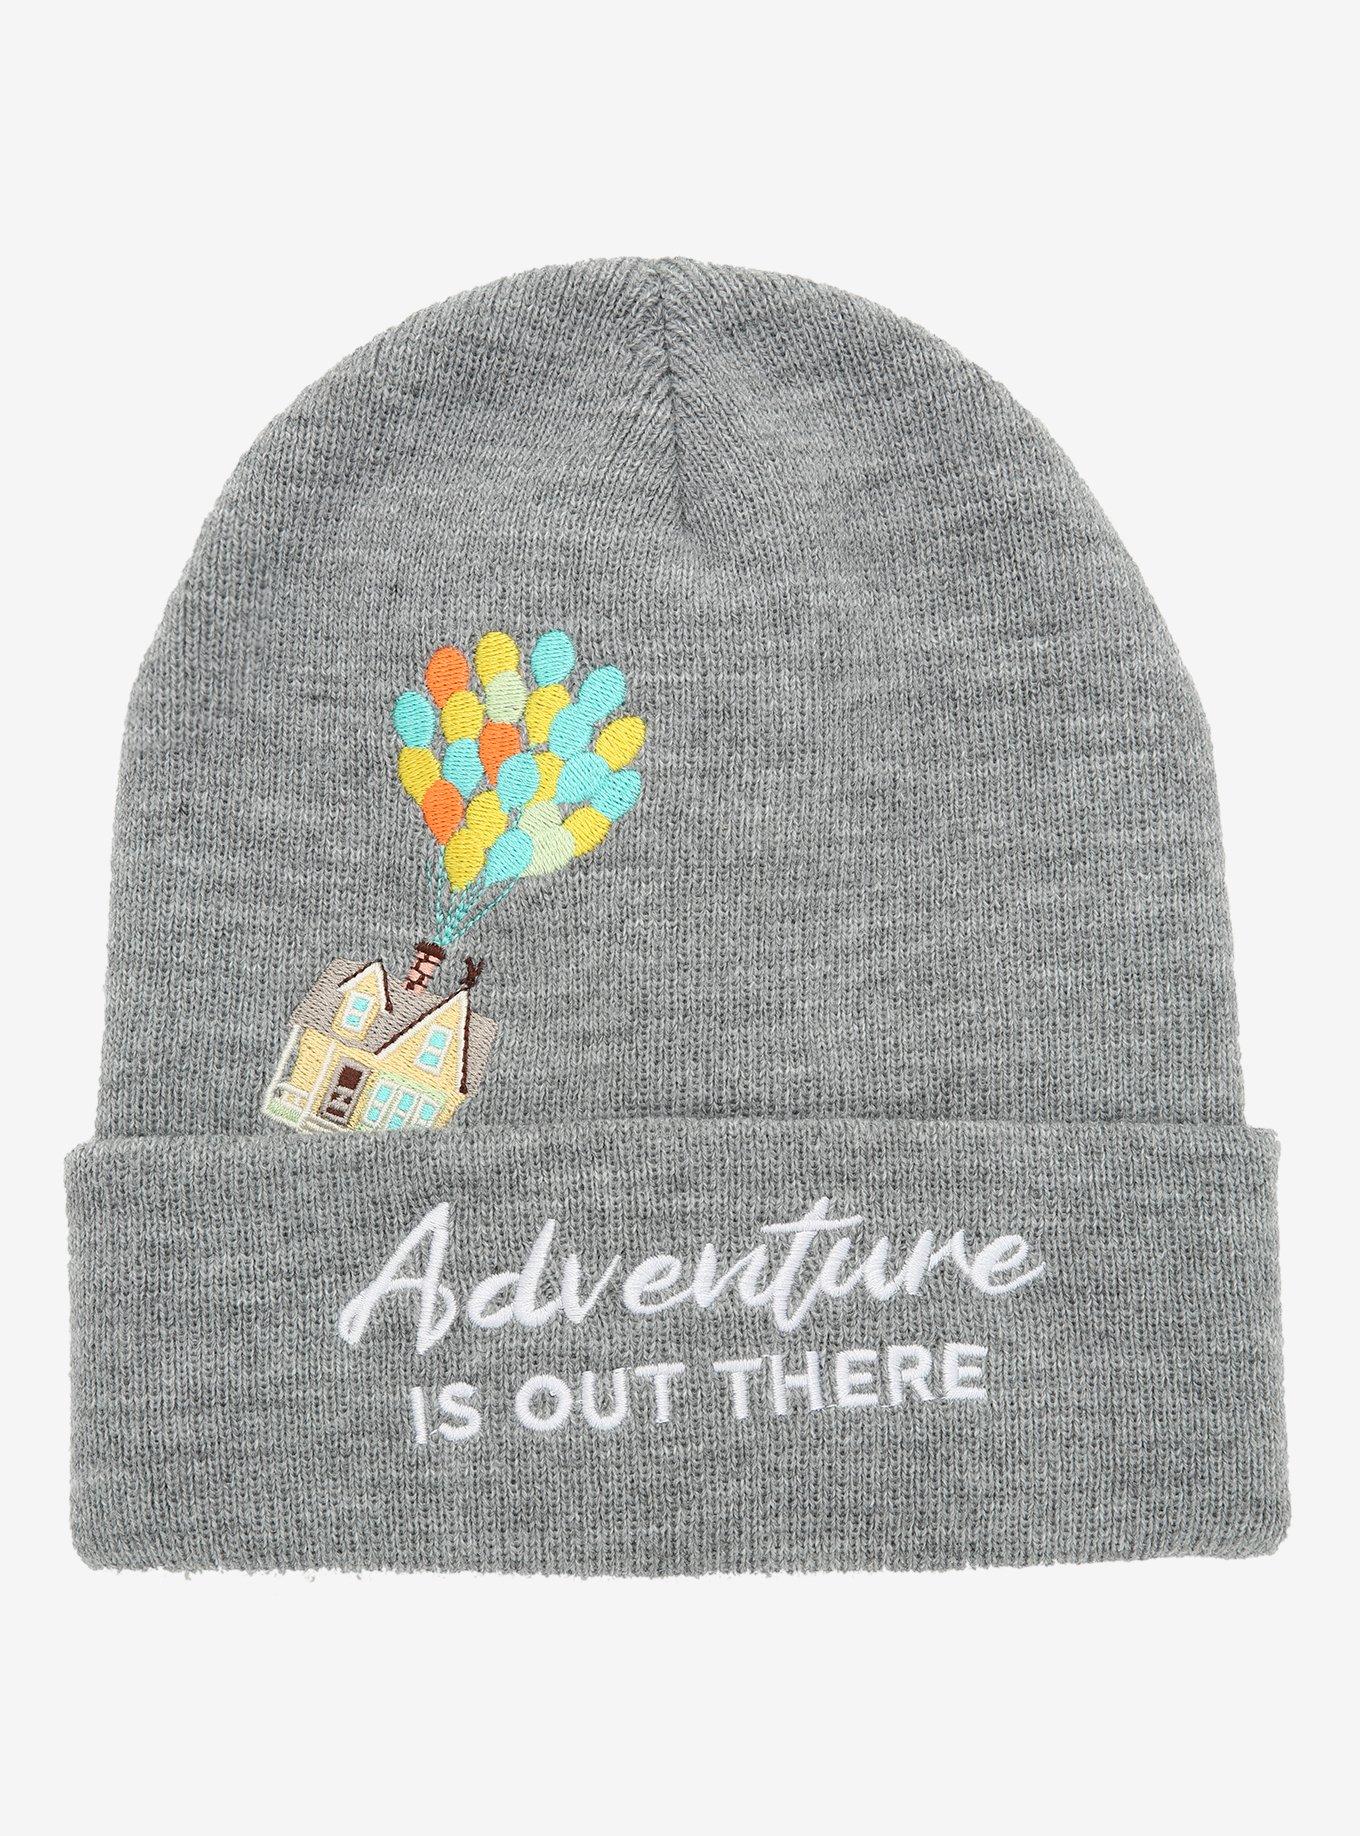 Disney Pixar Up Adventure Is Out There Beanie, , hi-res